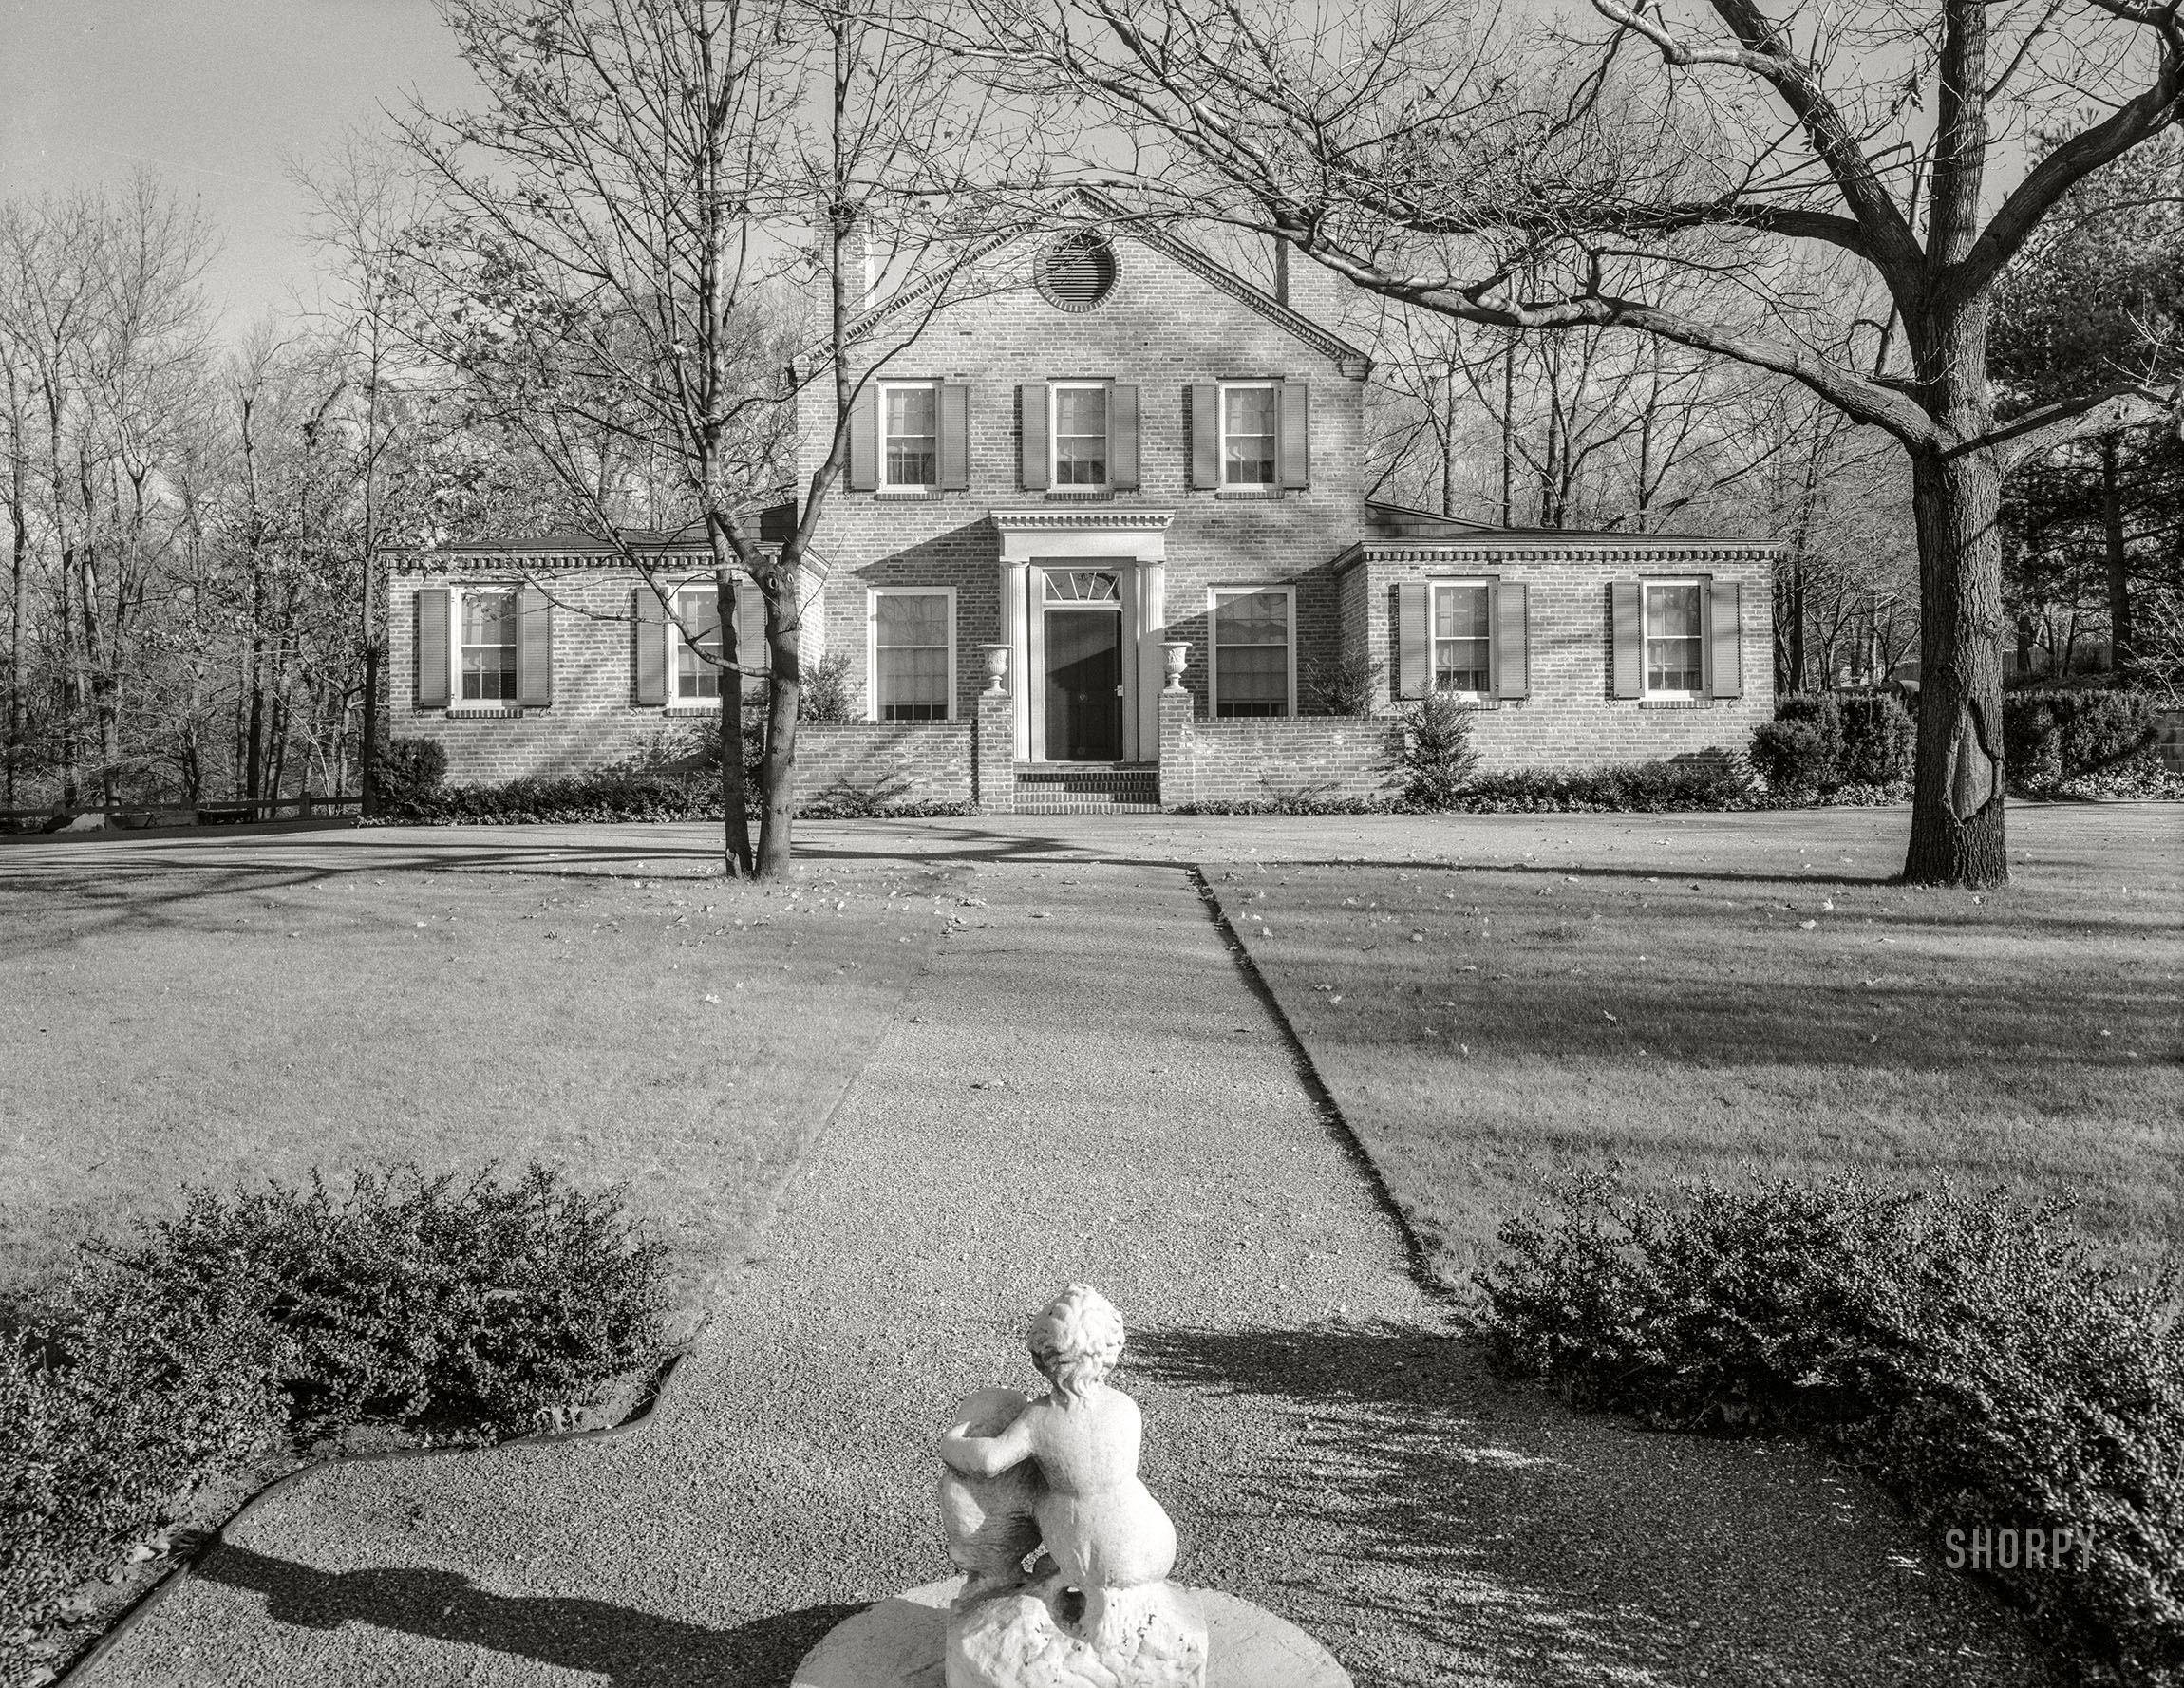 November 11, 1957. "Stedman Hanks, residence in Locust Valley, Long Island, N.Y. Axis view. Harrie Thomas Lindeberg, architect." Acetate negative by Gottscho-Schleisner. View full size.